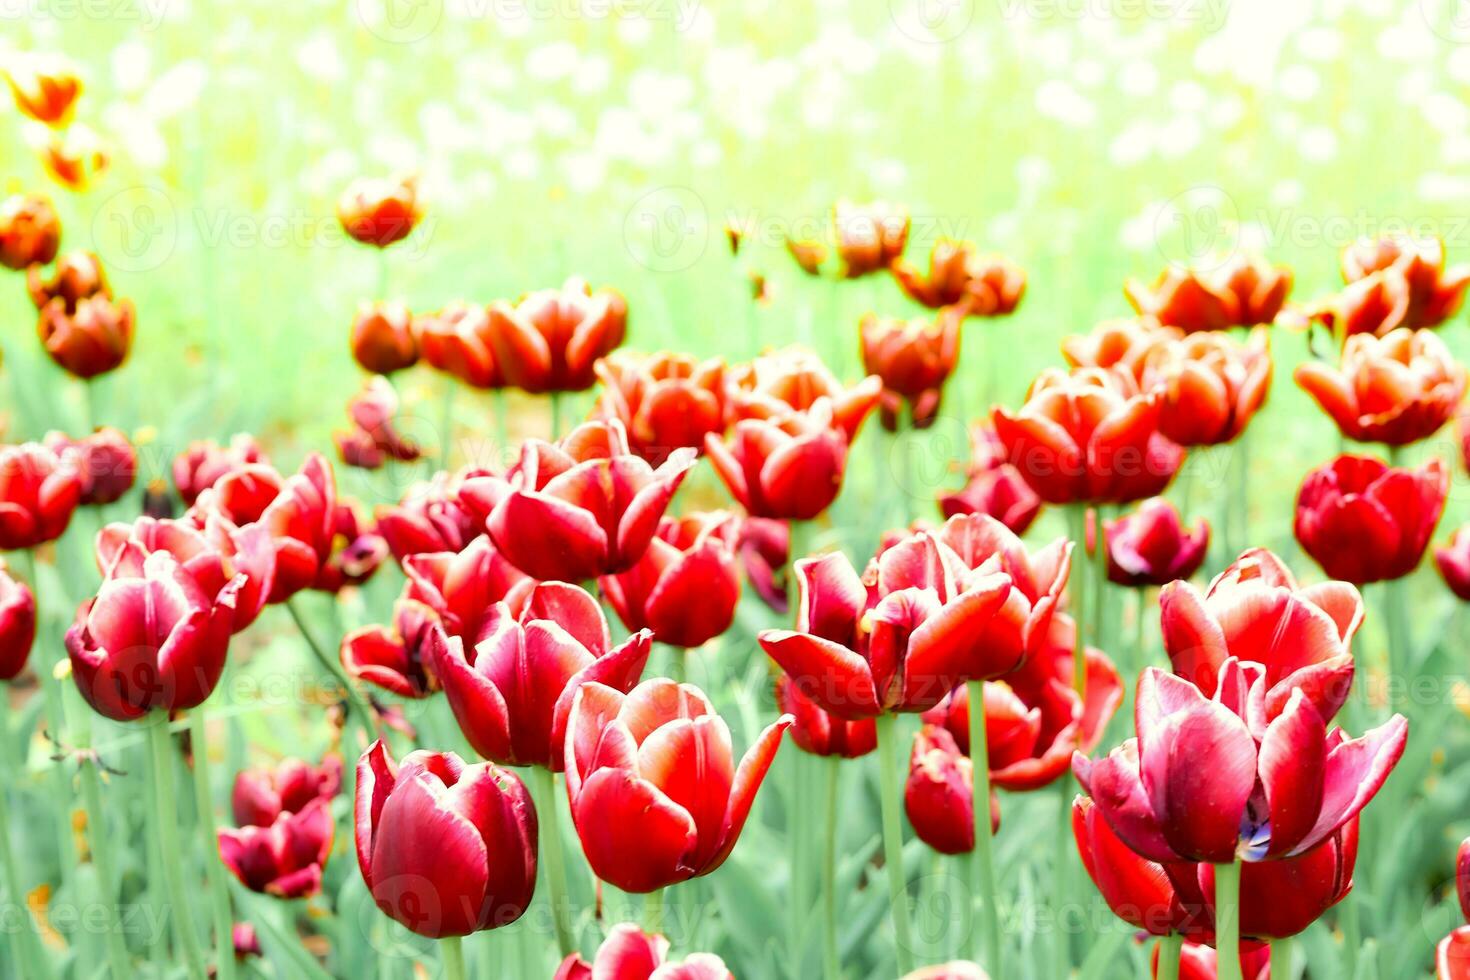 Blure delicate carpet picture of red tulips in the park, plantation photo